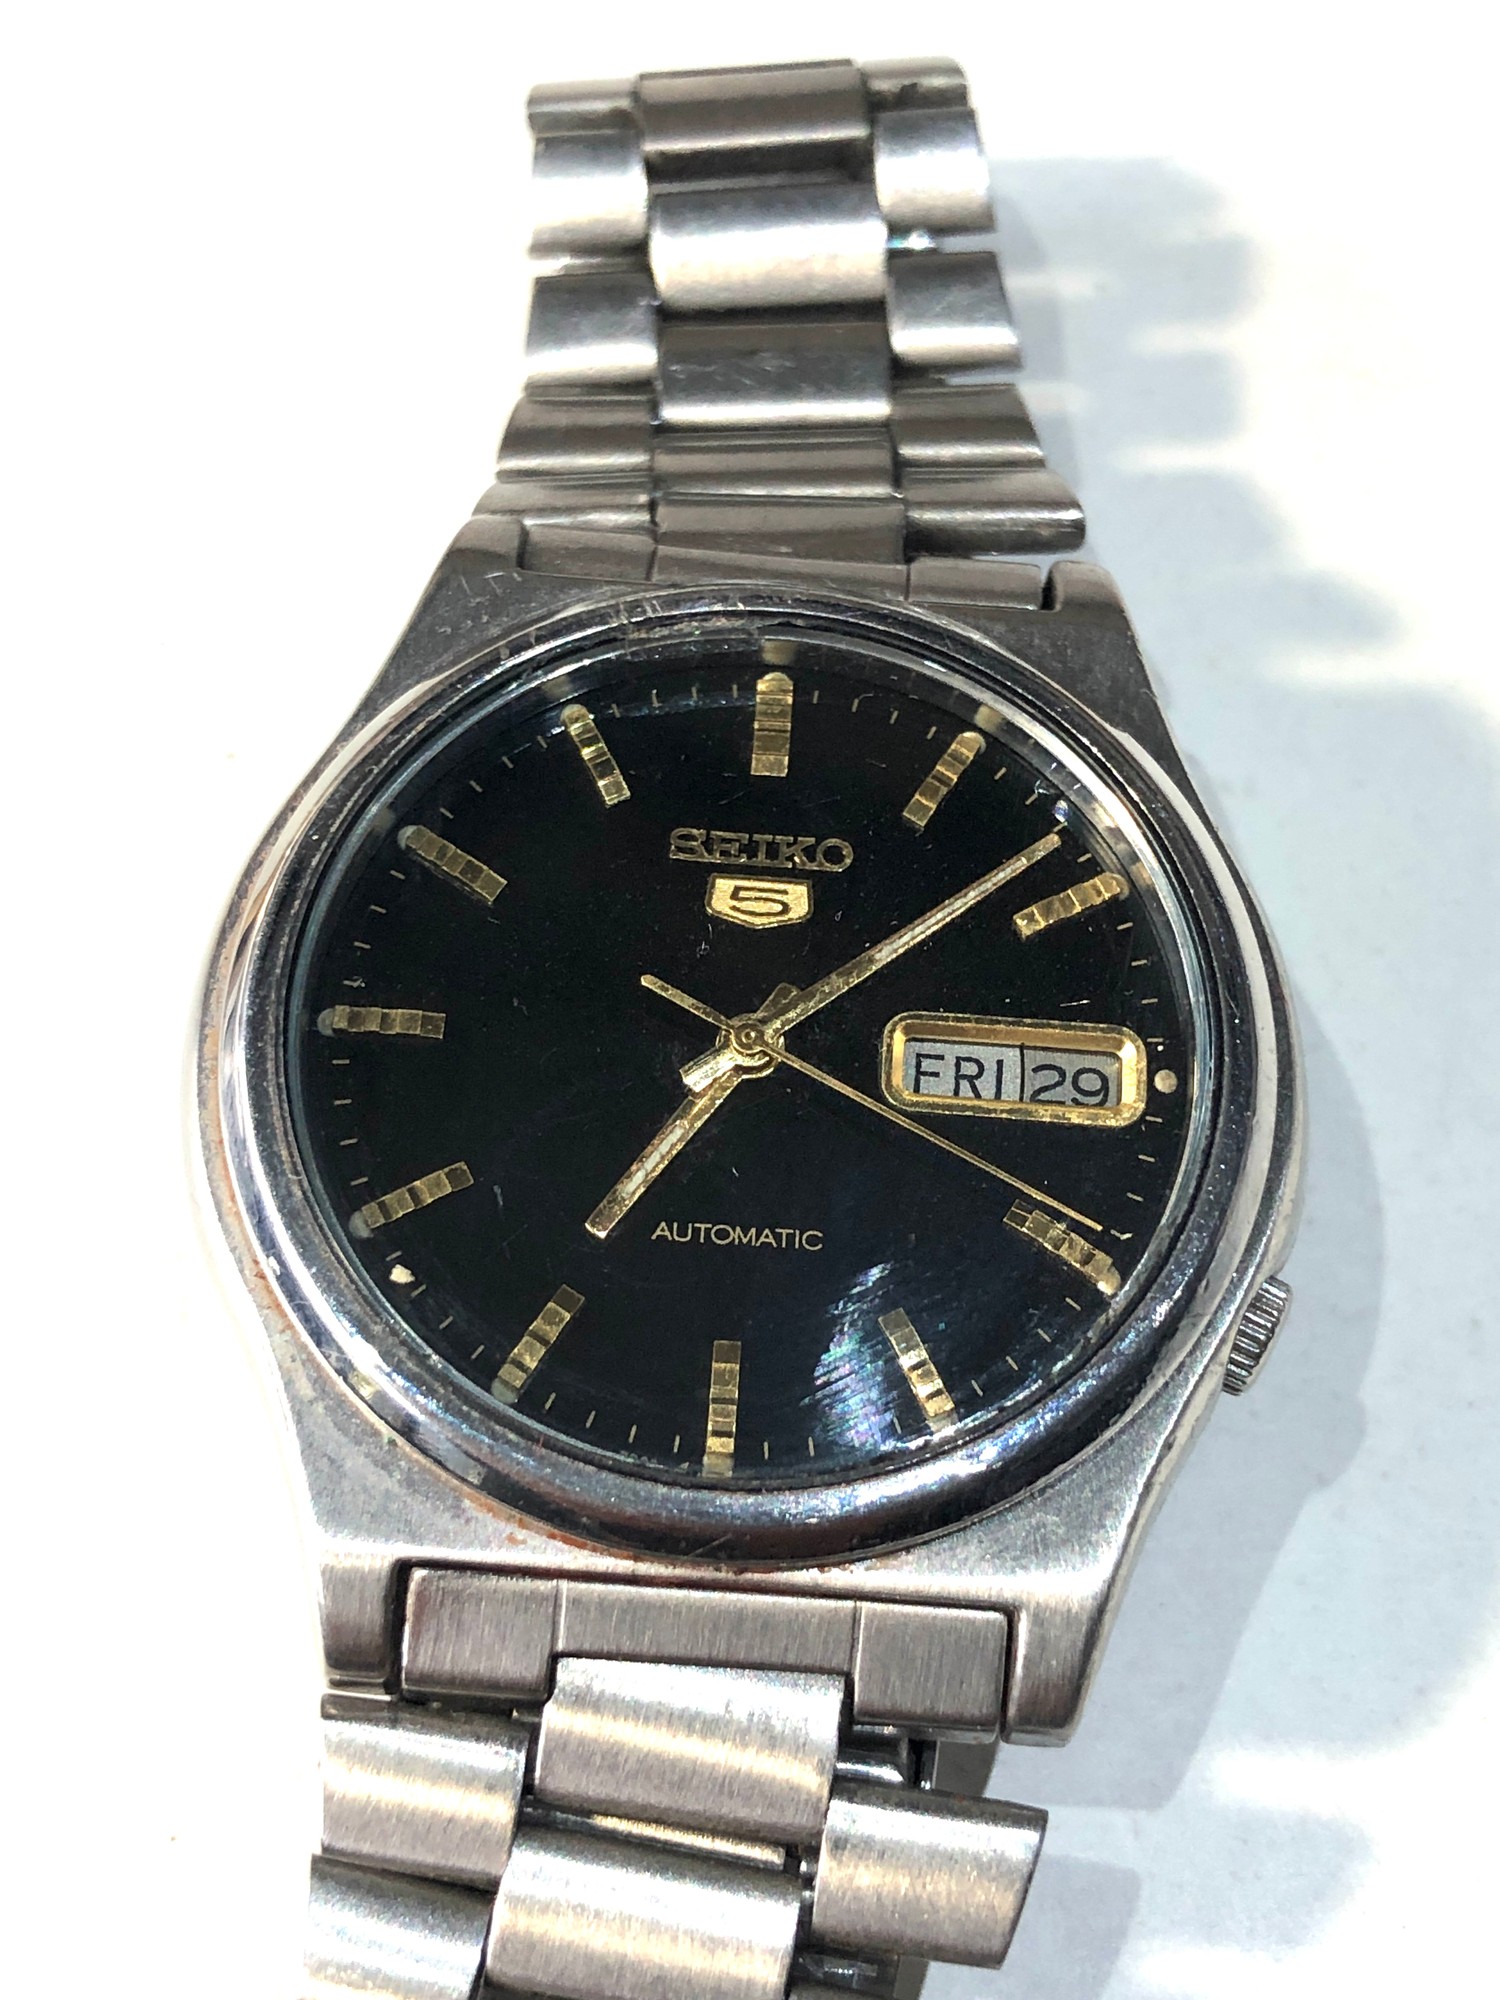 Vintage Seiko 5 automatic 7009-3170 gents wristwatch the watch is ...